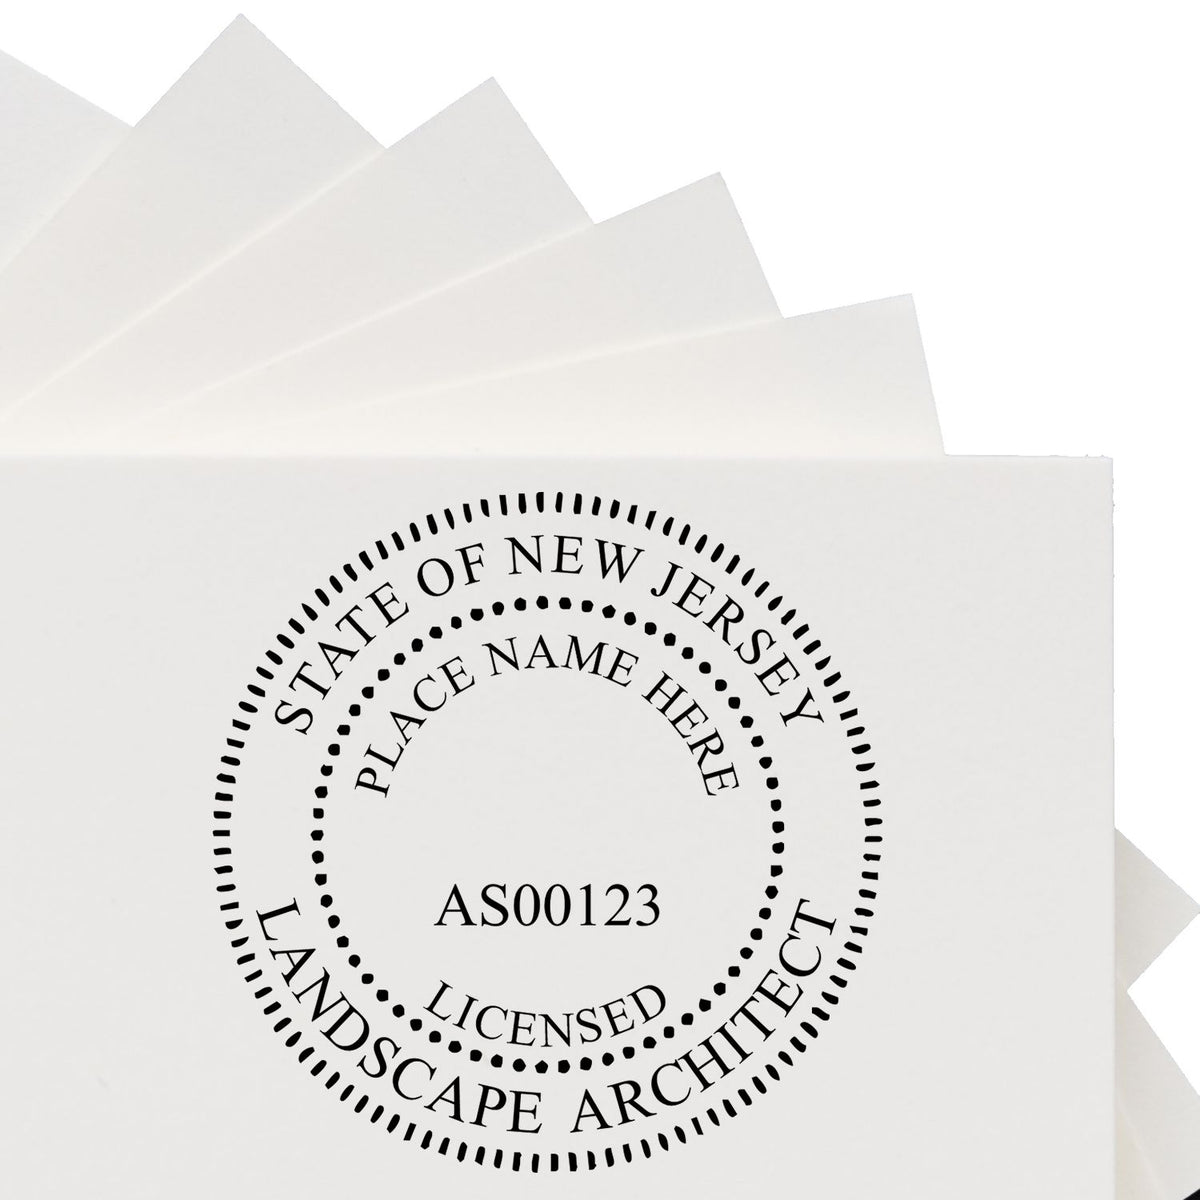 This paper is stamped with a sample imprint of the Premium MaxLight Pre-Inked New Jersey Landscape Architectural Stamp, signifying its quality and reliability.